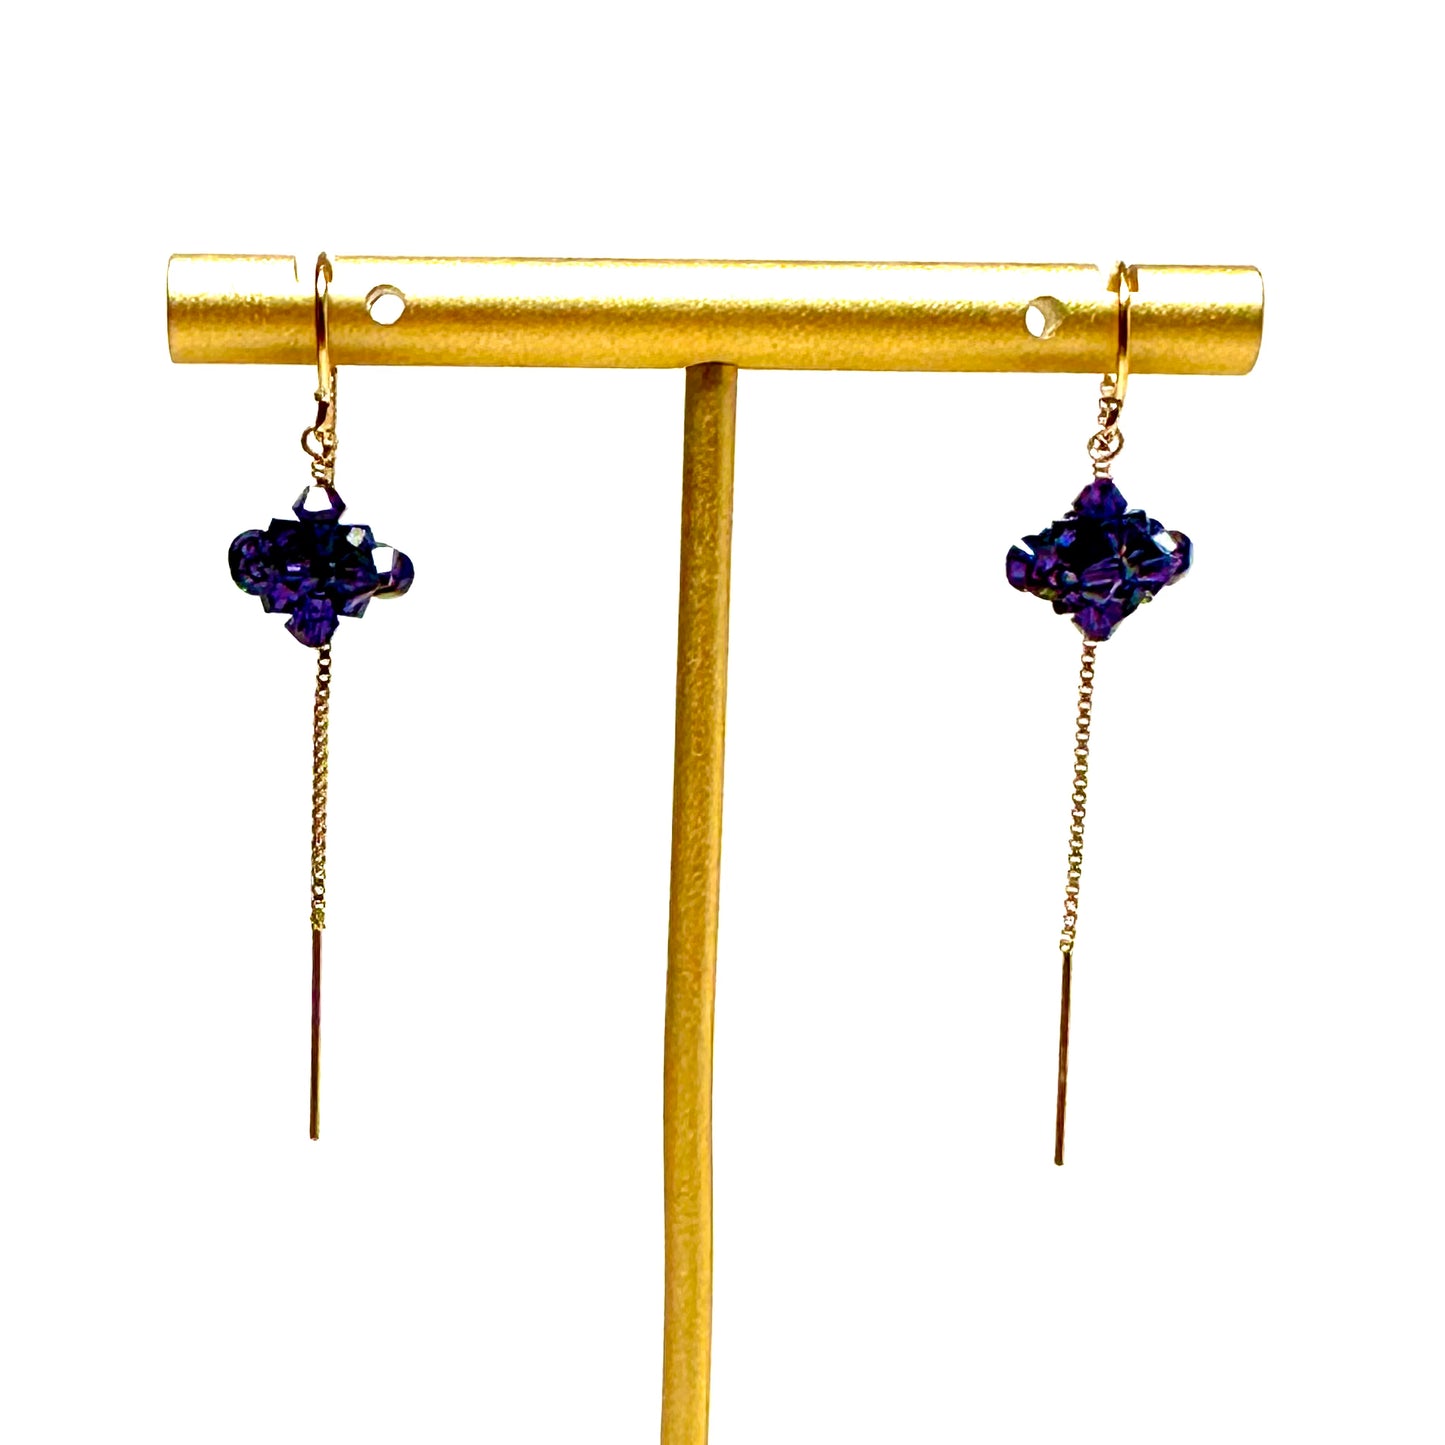 Bauble Earrings | 14K Gold Filled Threader | Assorted Crystal Colors